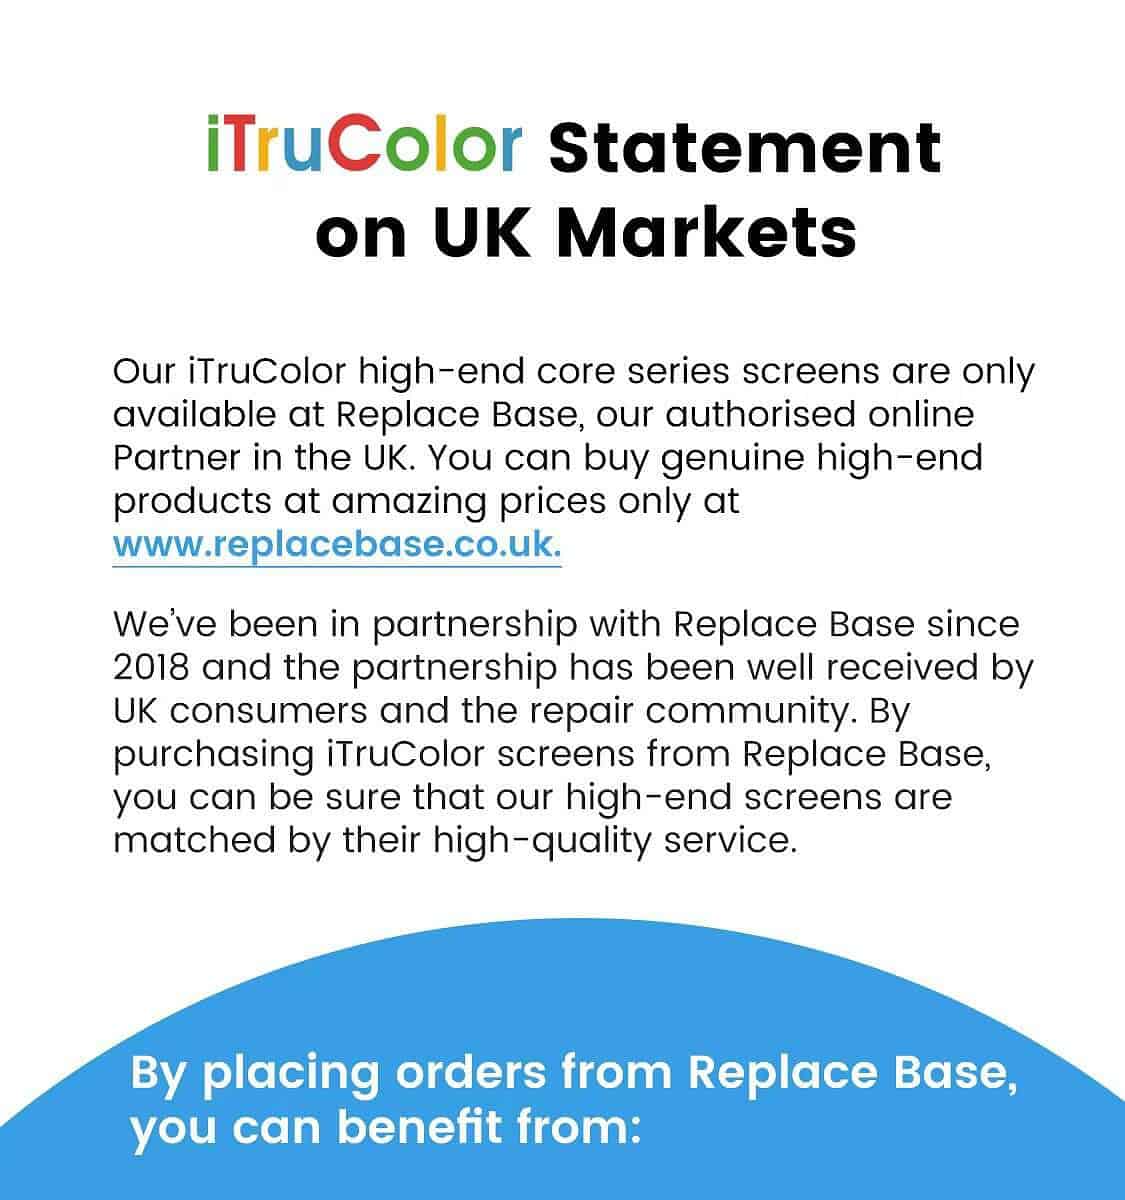 iTruColor Statement on UK markets